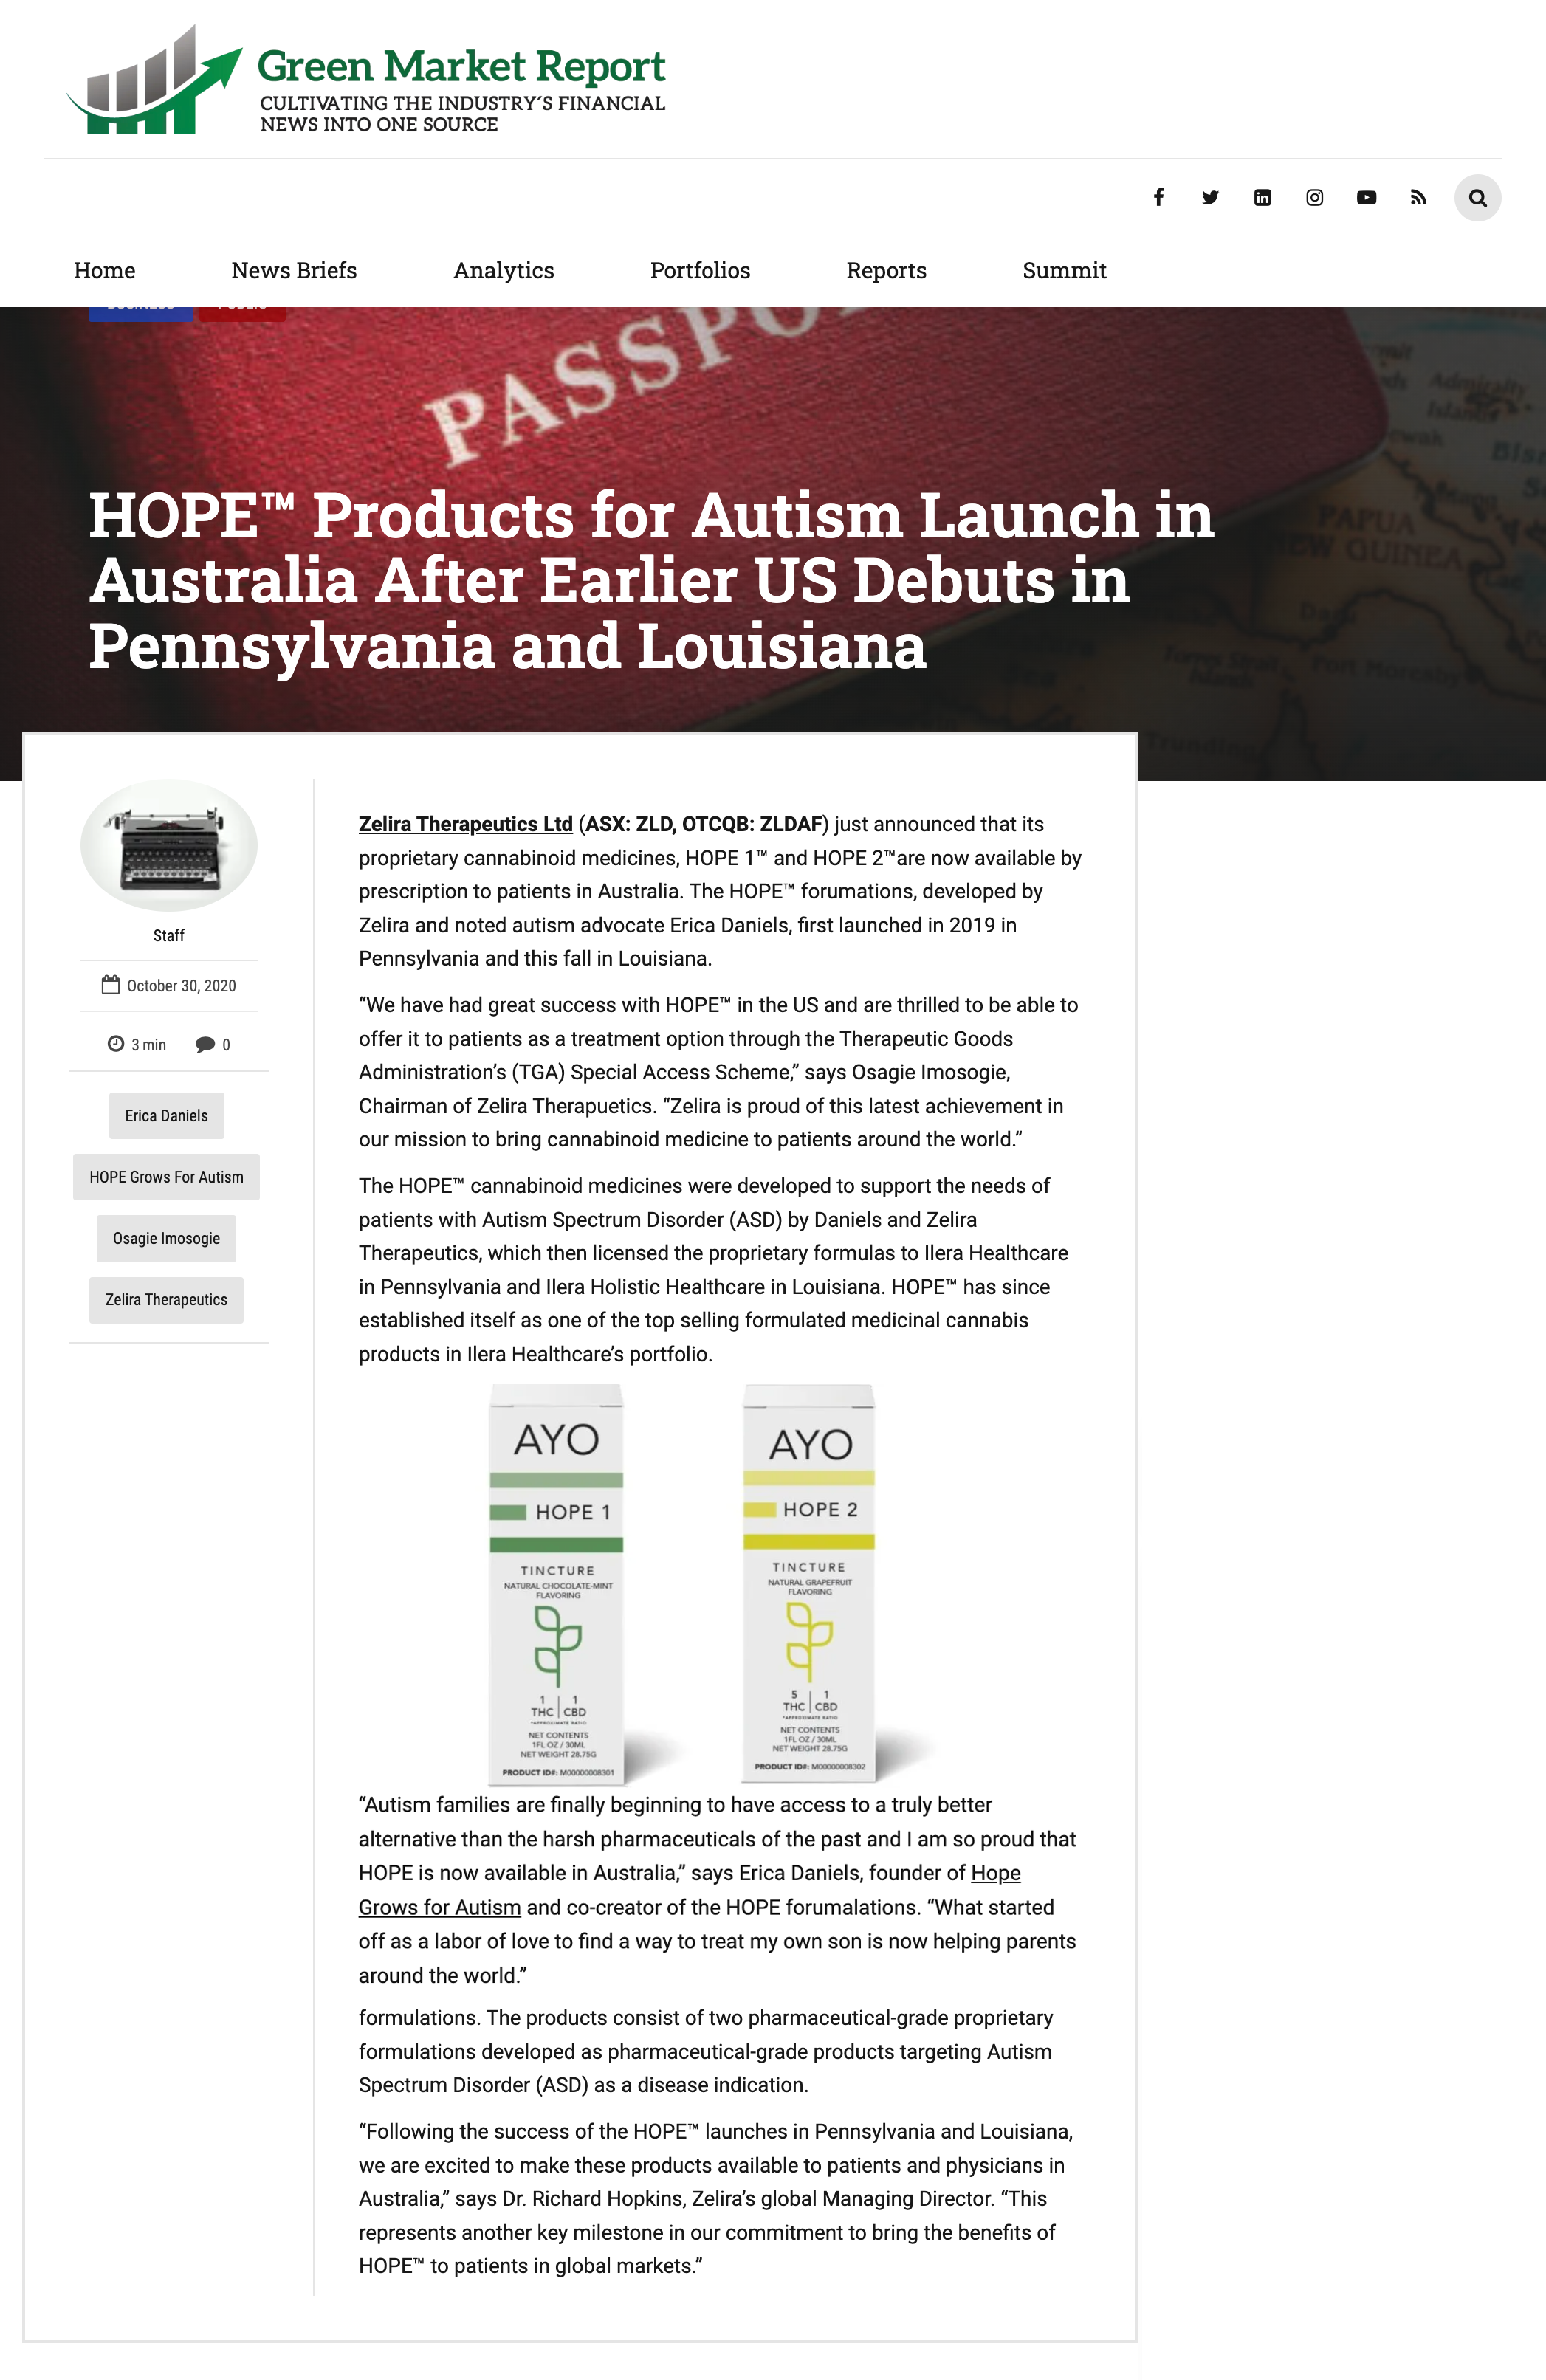 screencapture-greenmarketreport-hope-products-for-autism-launch-in-australia-after-earlier-us-debuts-in-pennsylvania-and-louisiana-2022-05-05-12_23_04.png